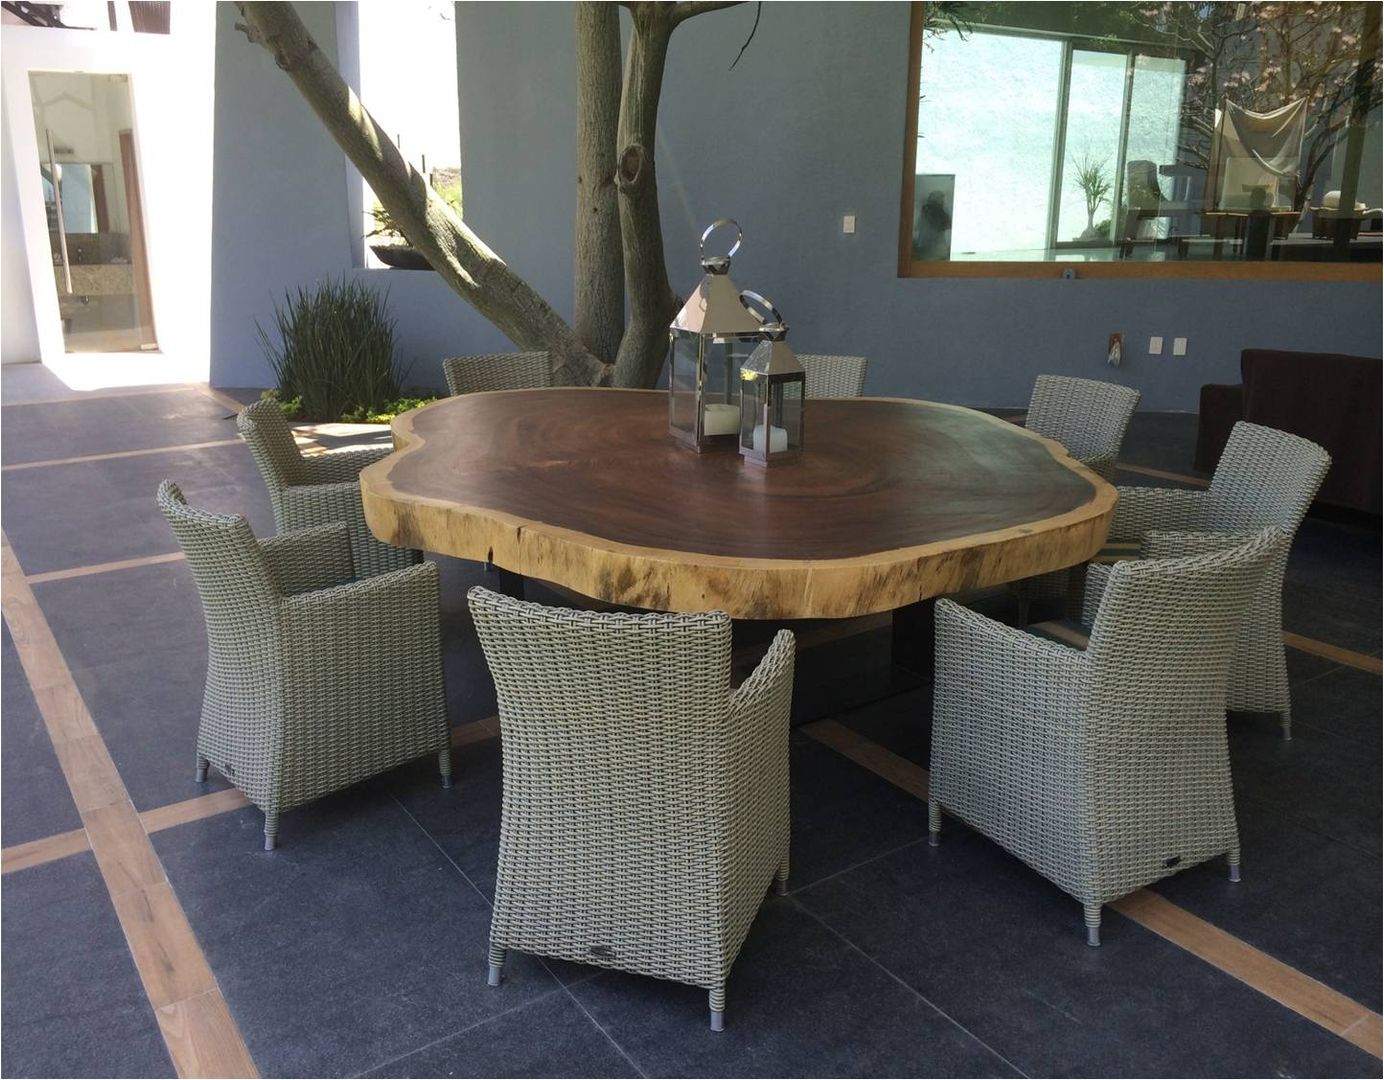 COMEDORES, NATULIER NATULIER Modern dining room Tables